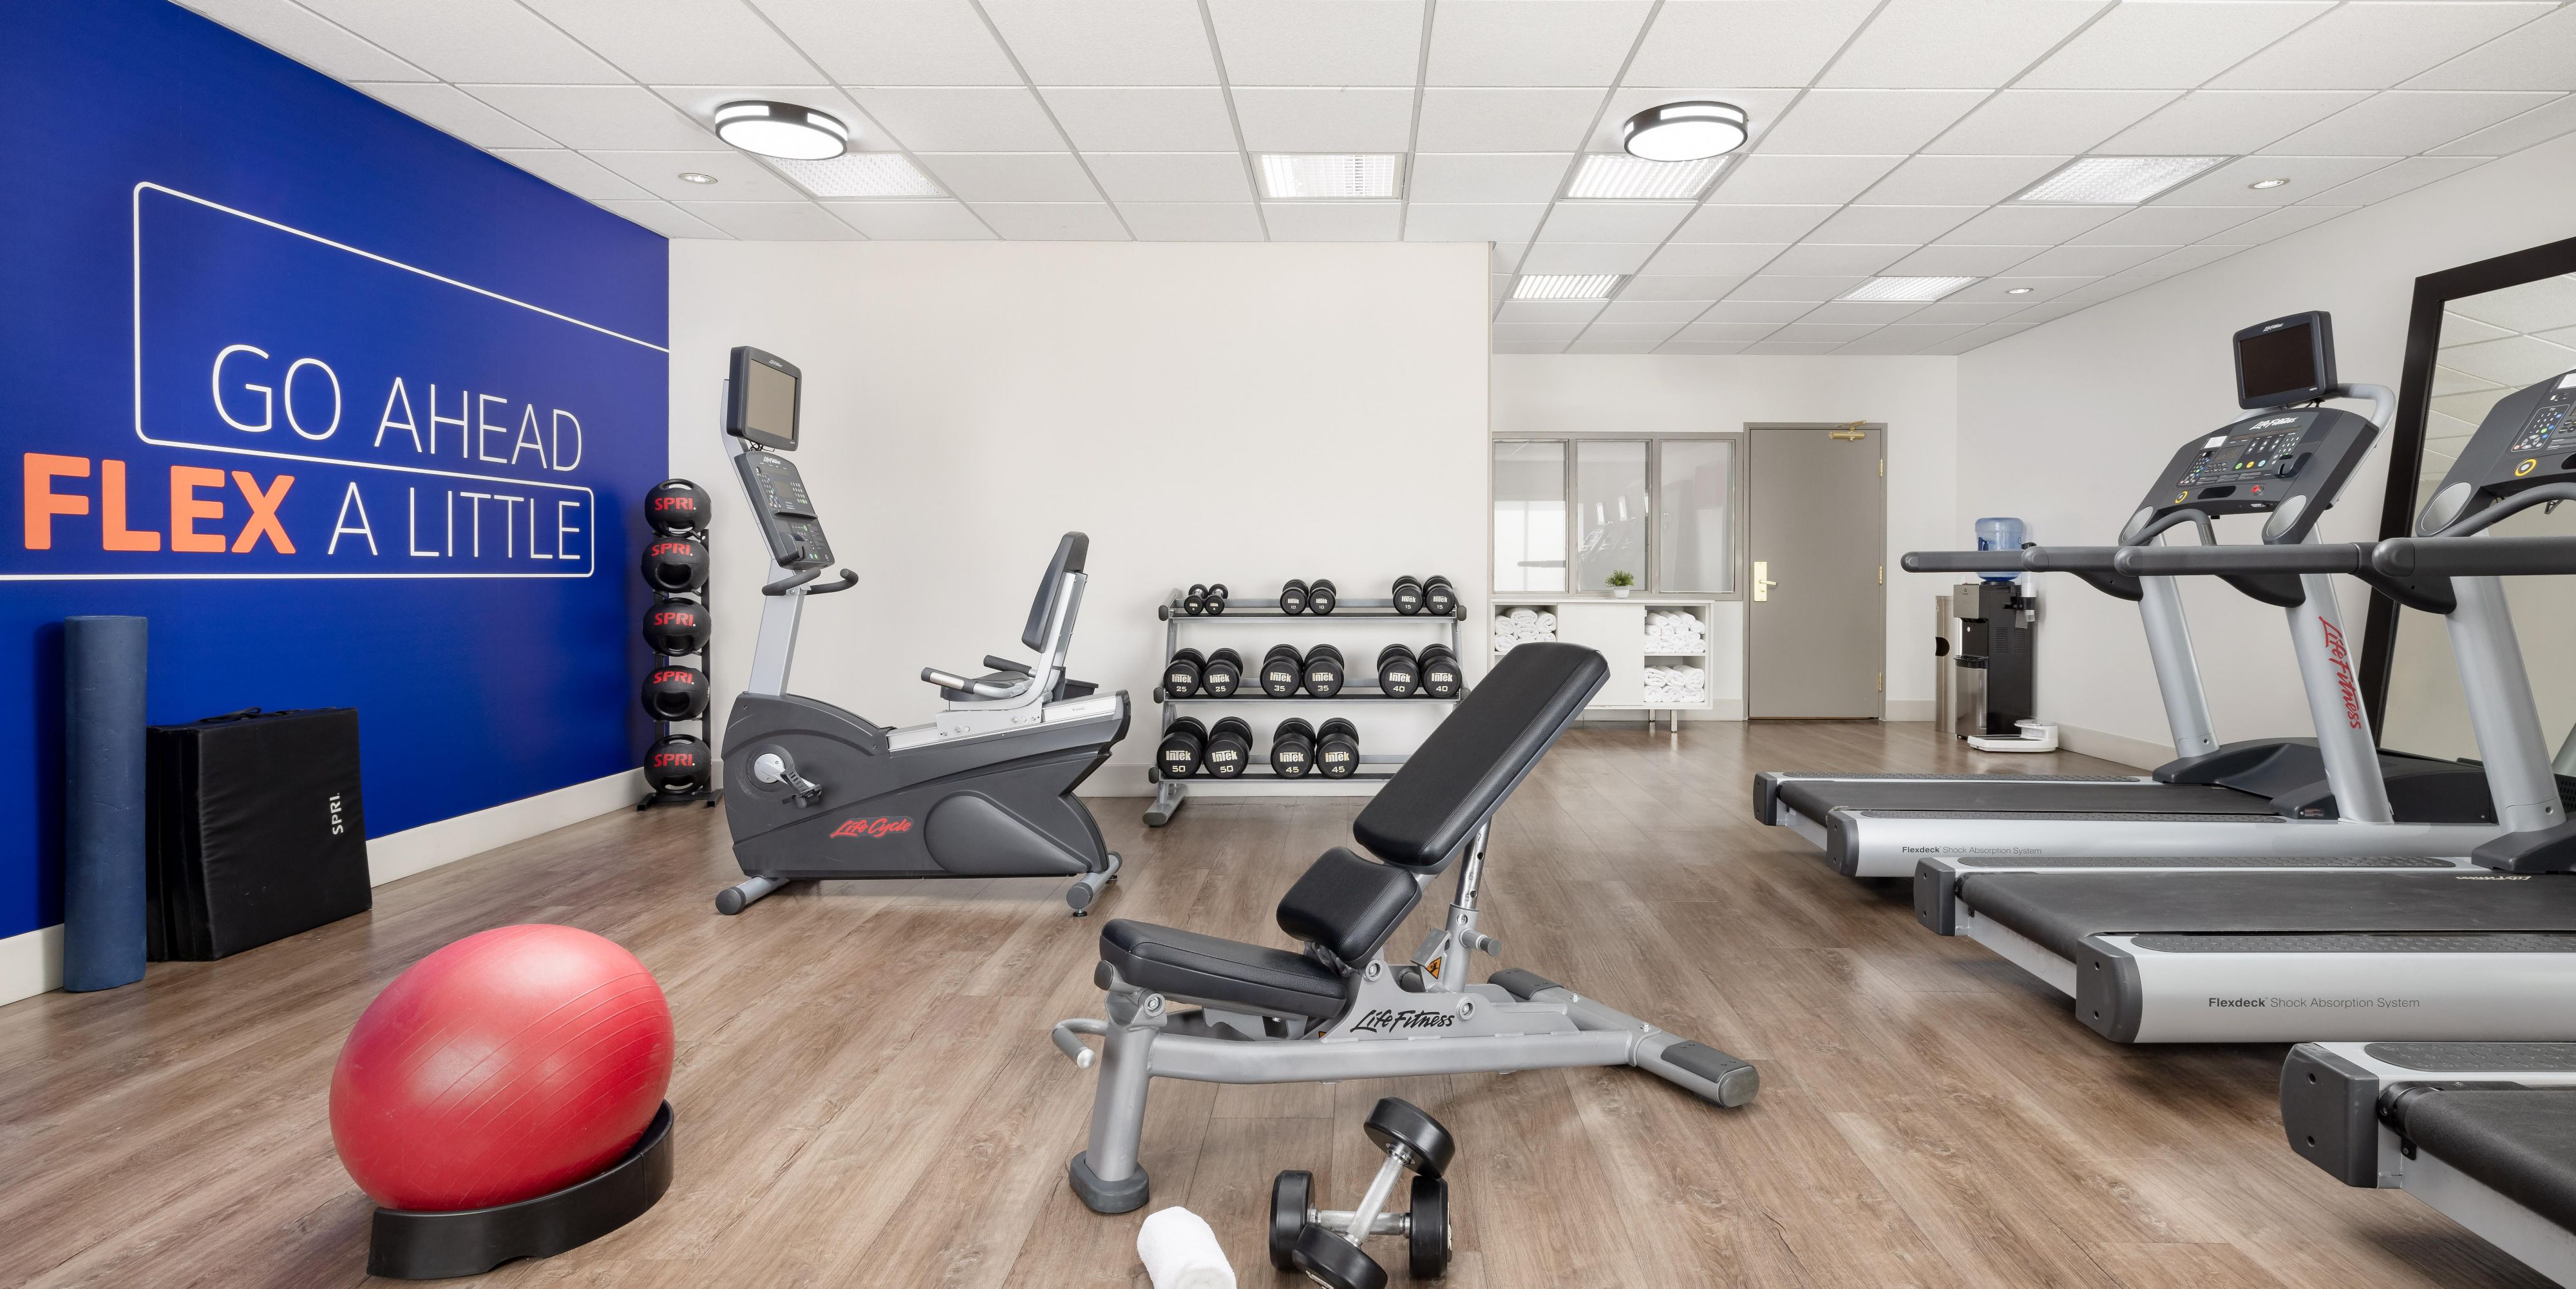 Keep up your routine on the road with our convenient on-site fitness center. With a range of cardiovascular equipment and free weights, our 24-hour workout facility will meet all of your needs.
